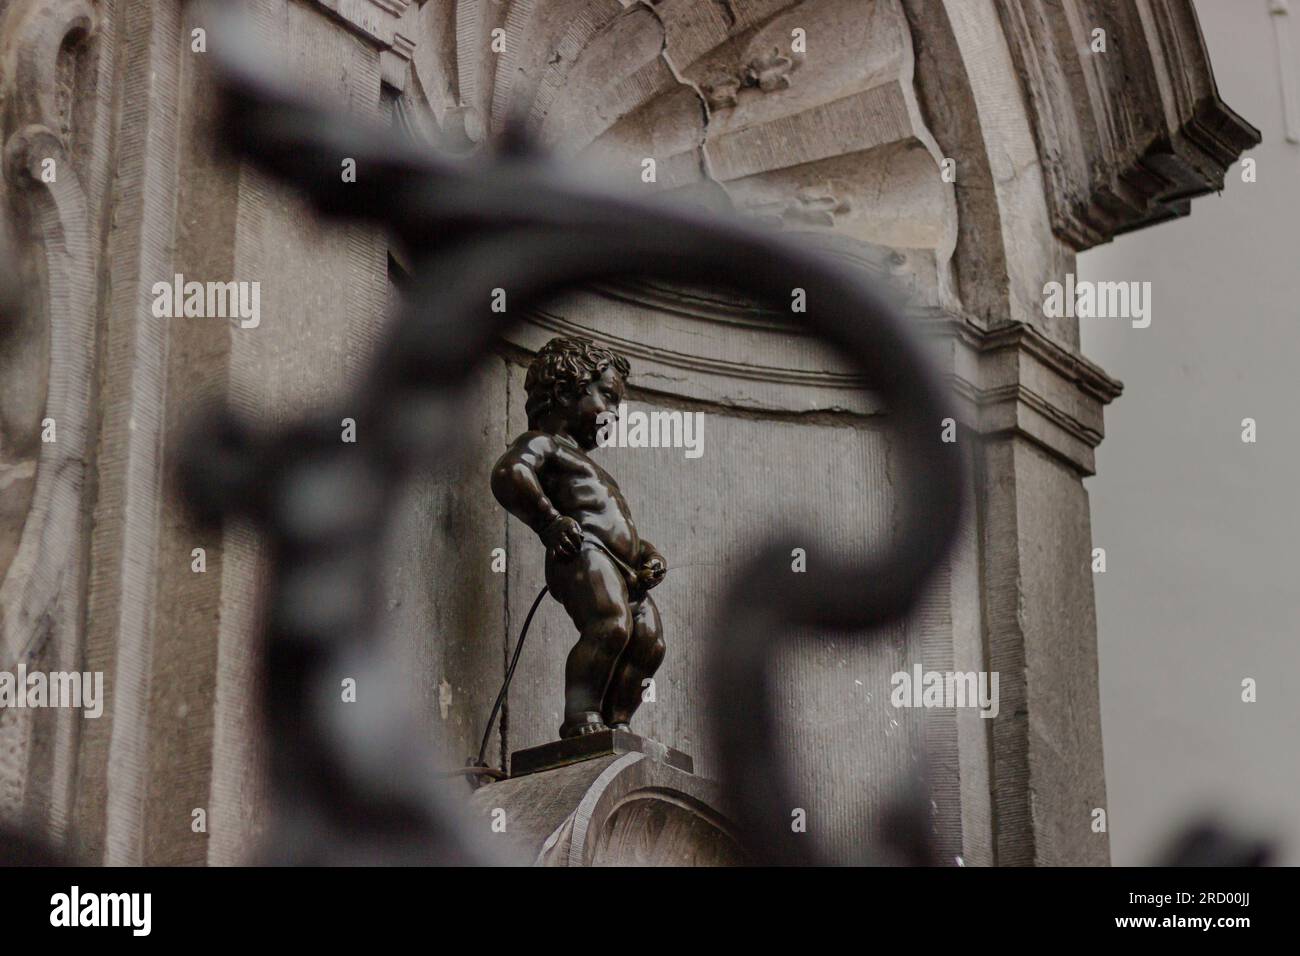 The famous statue of Manneken pis in Brussels, I took the photo focus in a different angle. Stock Photo